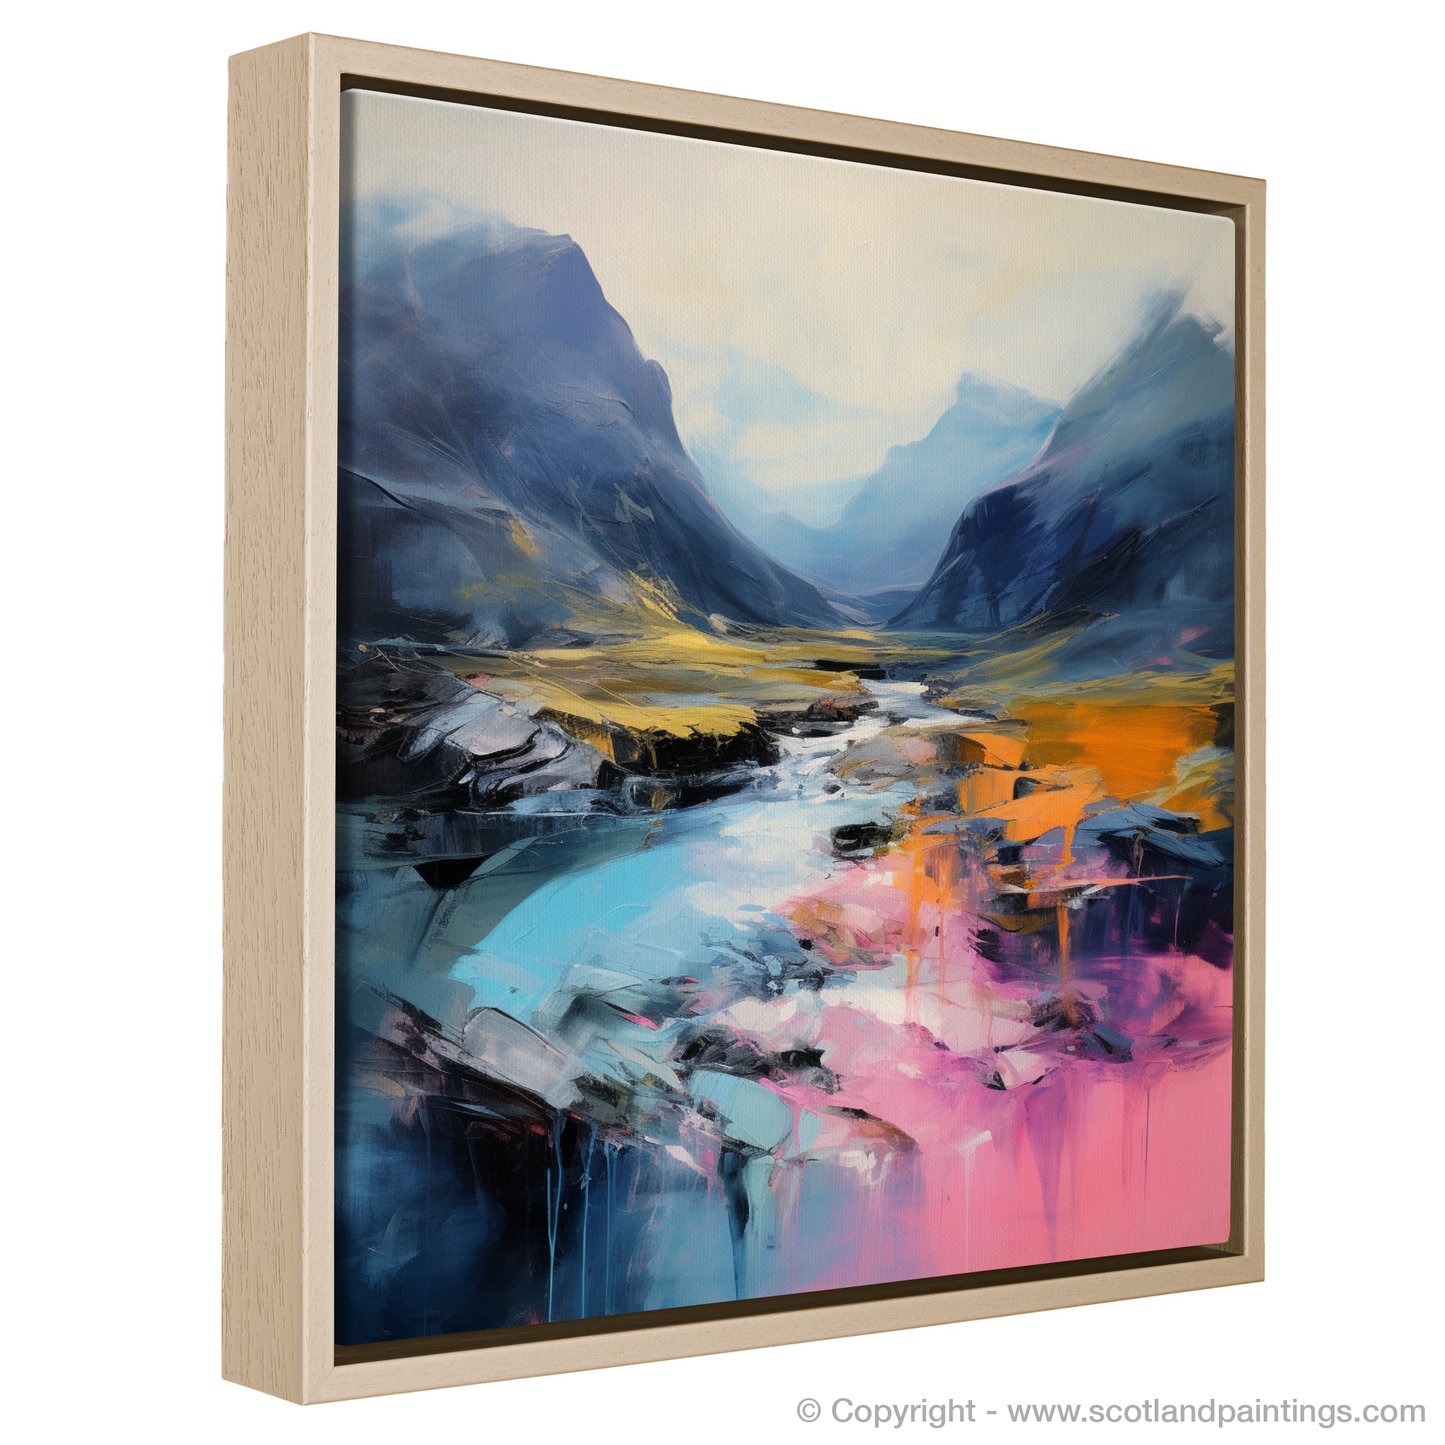 Painting and Art Print of Isle of Skye Fairy Pools at dusk in summer entitled "Dusk Embrace at Fairy Pools".